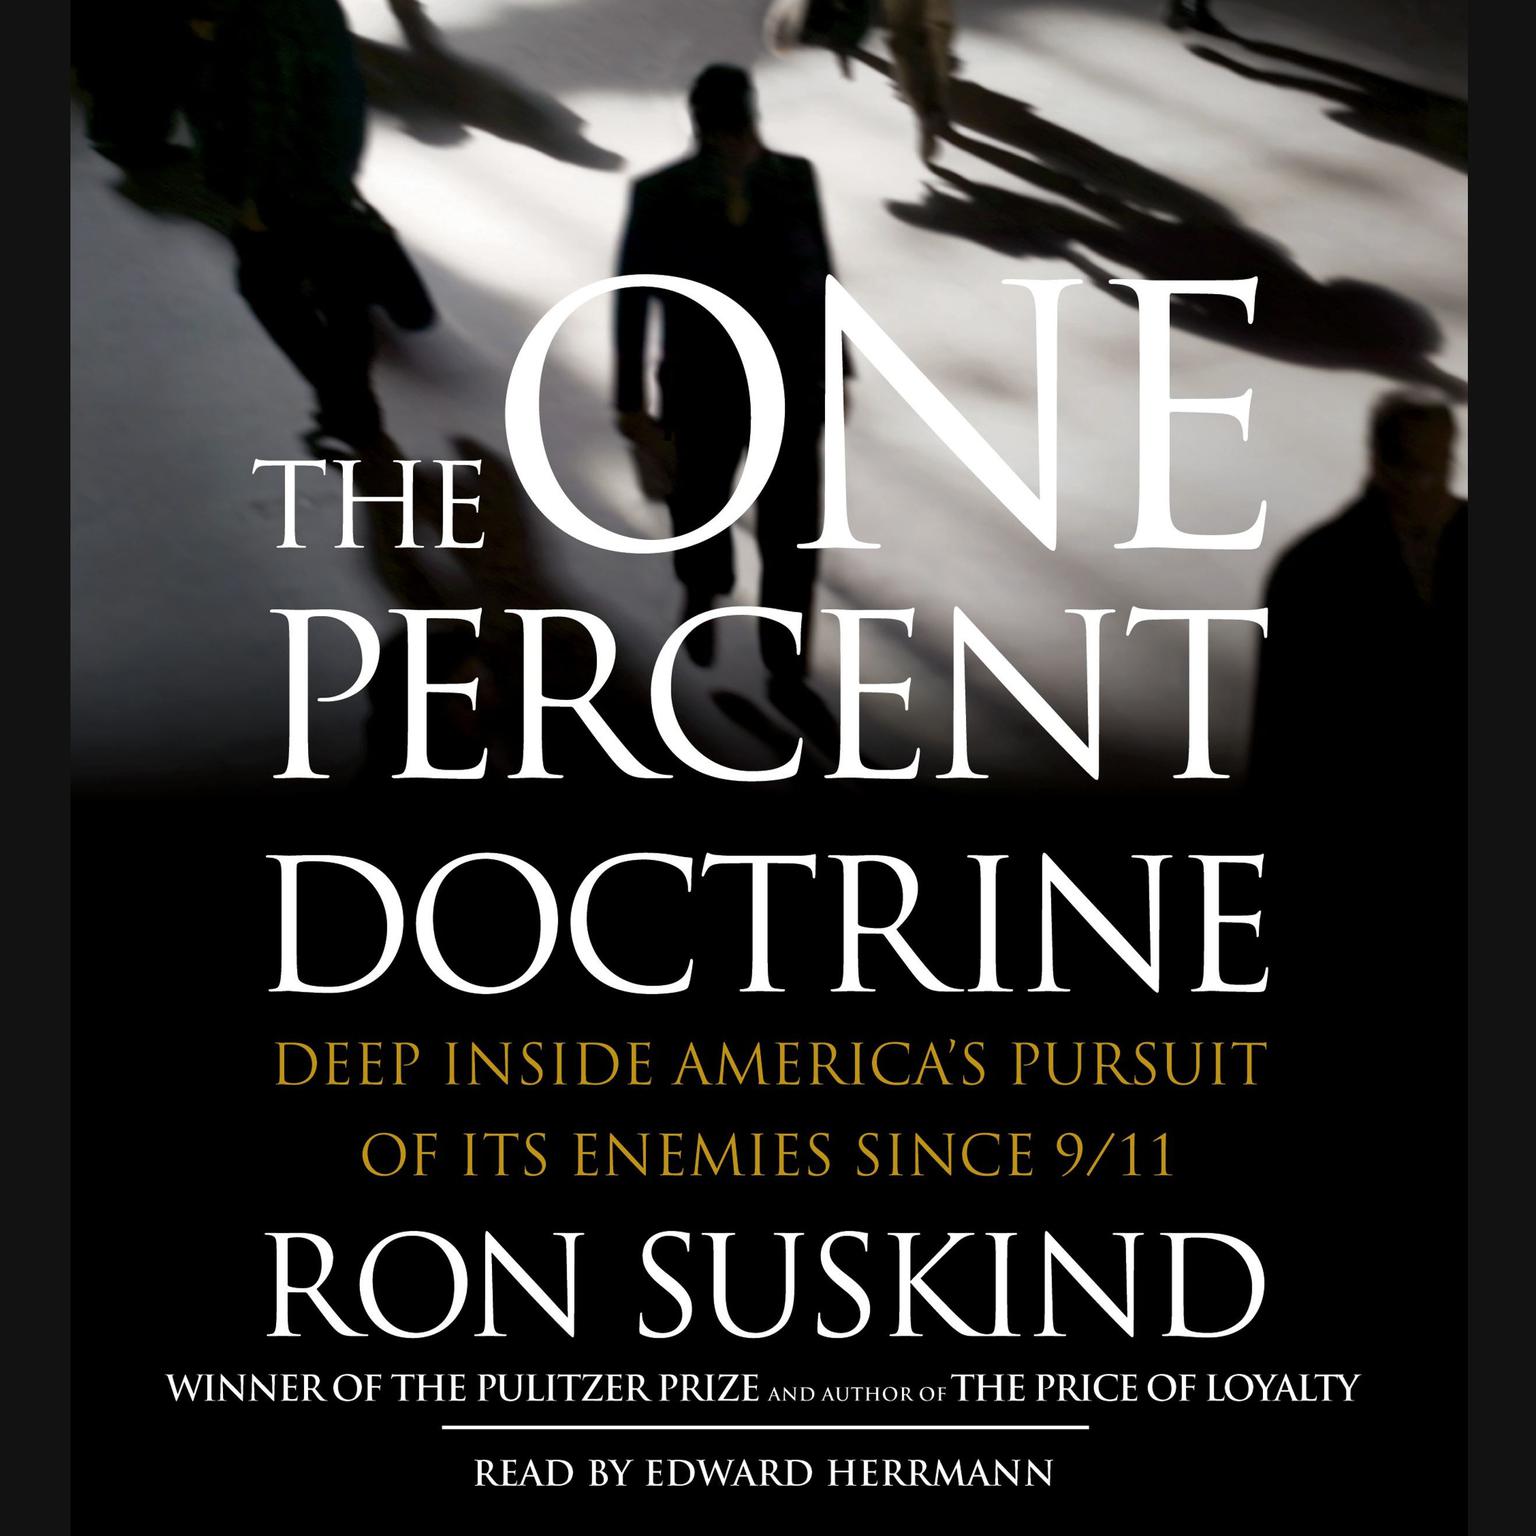 The One Percent Doctrine (Abridged): Deep Inside Americas Pursuit of Its Enemies Since 9/11 Audiobook, by Ron Suskind